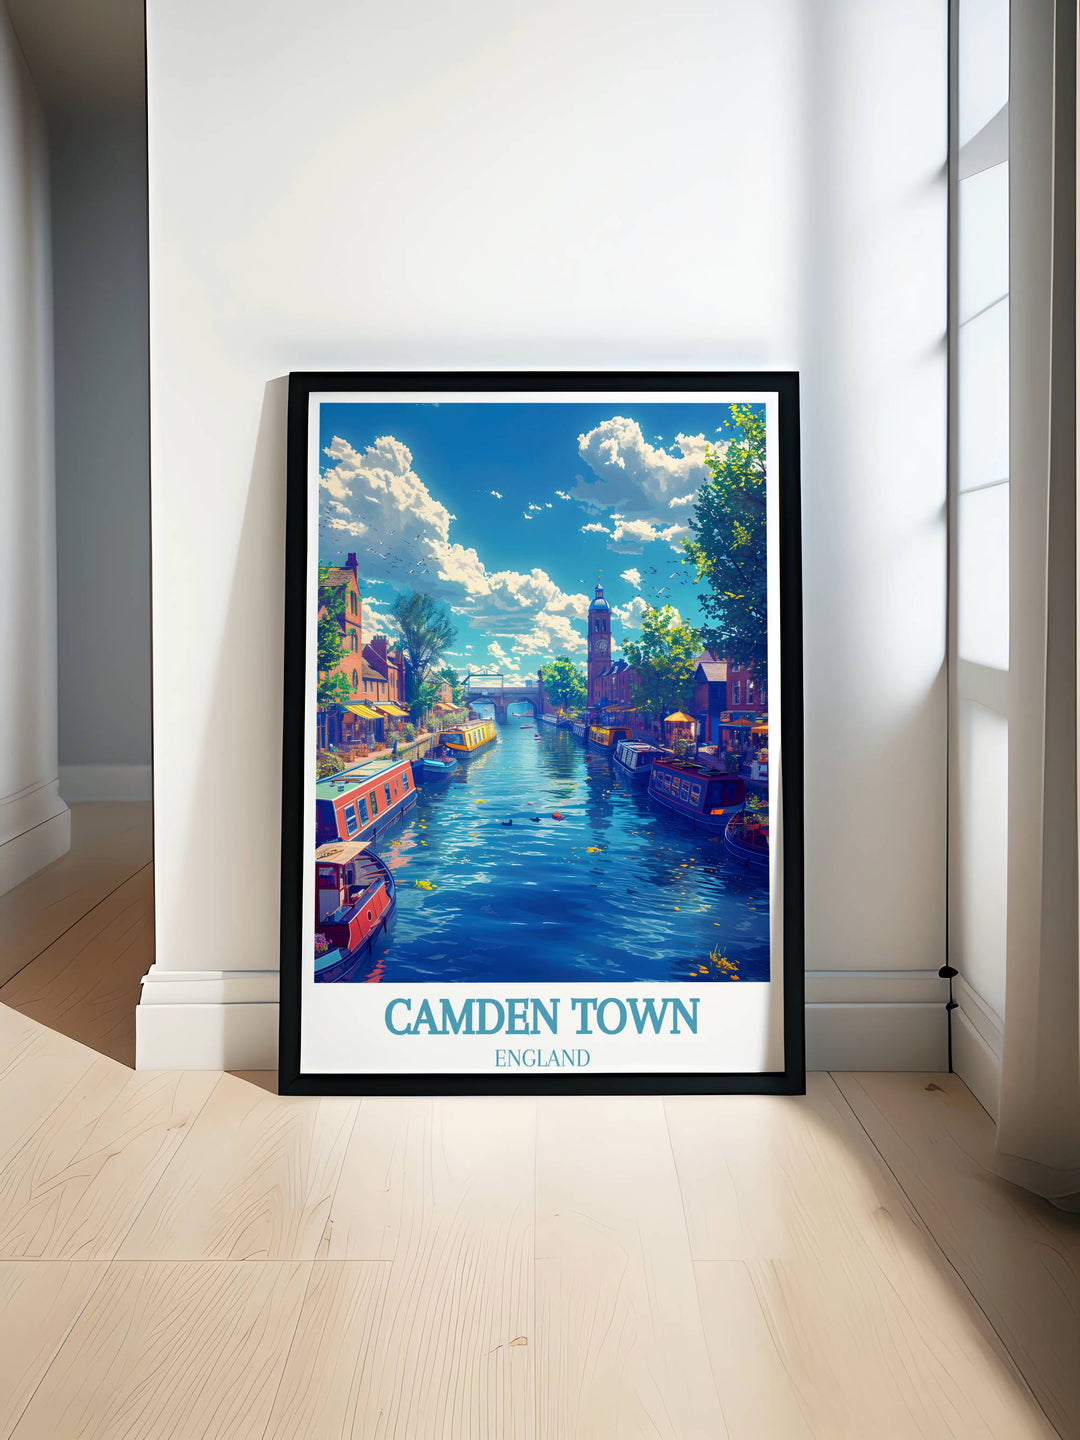 Beautiful Camden Lock print capturing the vibrant energy of Camden Town London with its iconic market street art and the famous Camden Lock Bridge perfect for adding a touch of London to your home decor or as a unique gift for travel enthusiasts and art lovers.